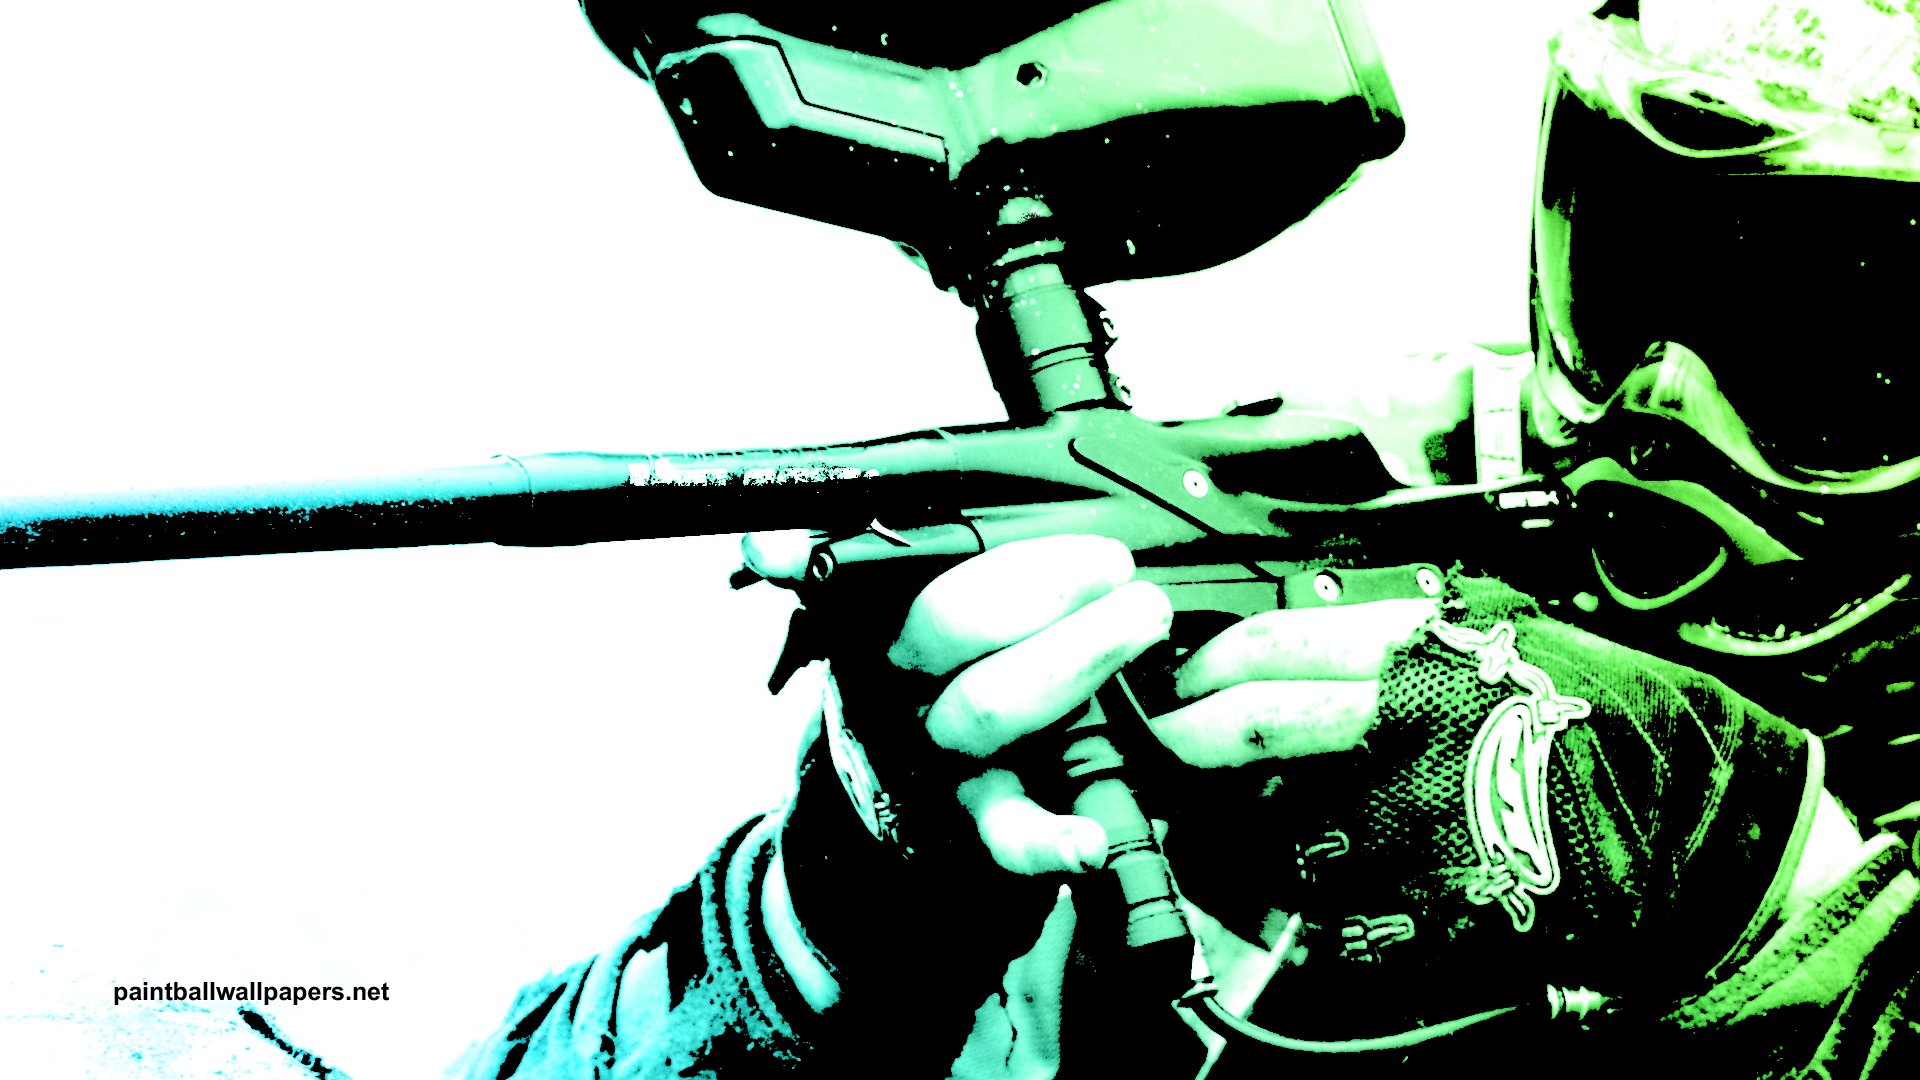 paintball, Weapon, Gun, Paint, Extreme, Strategy, Action Wallpaper